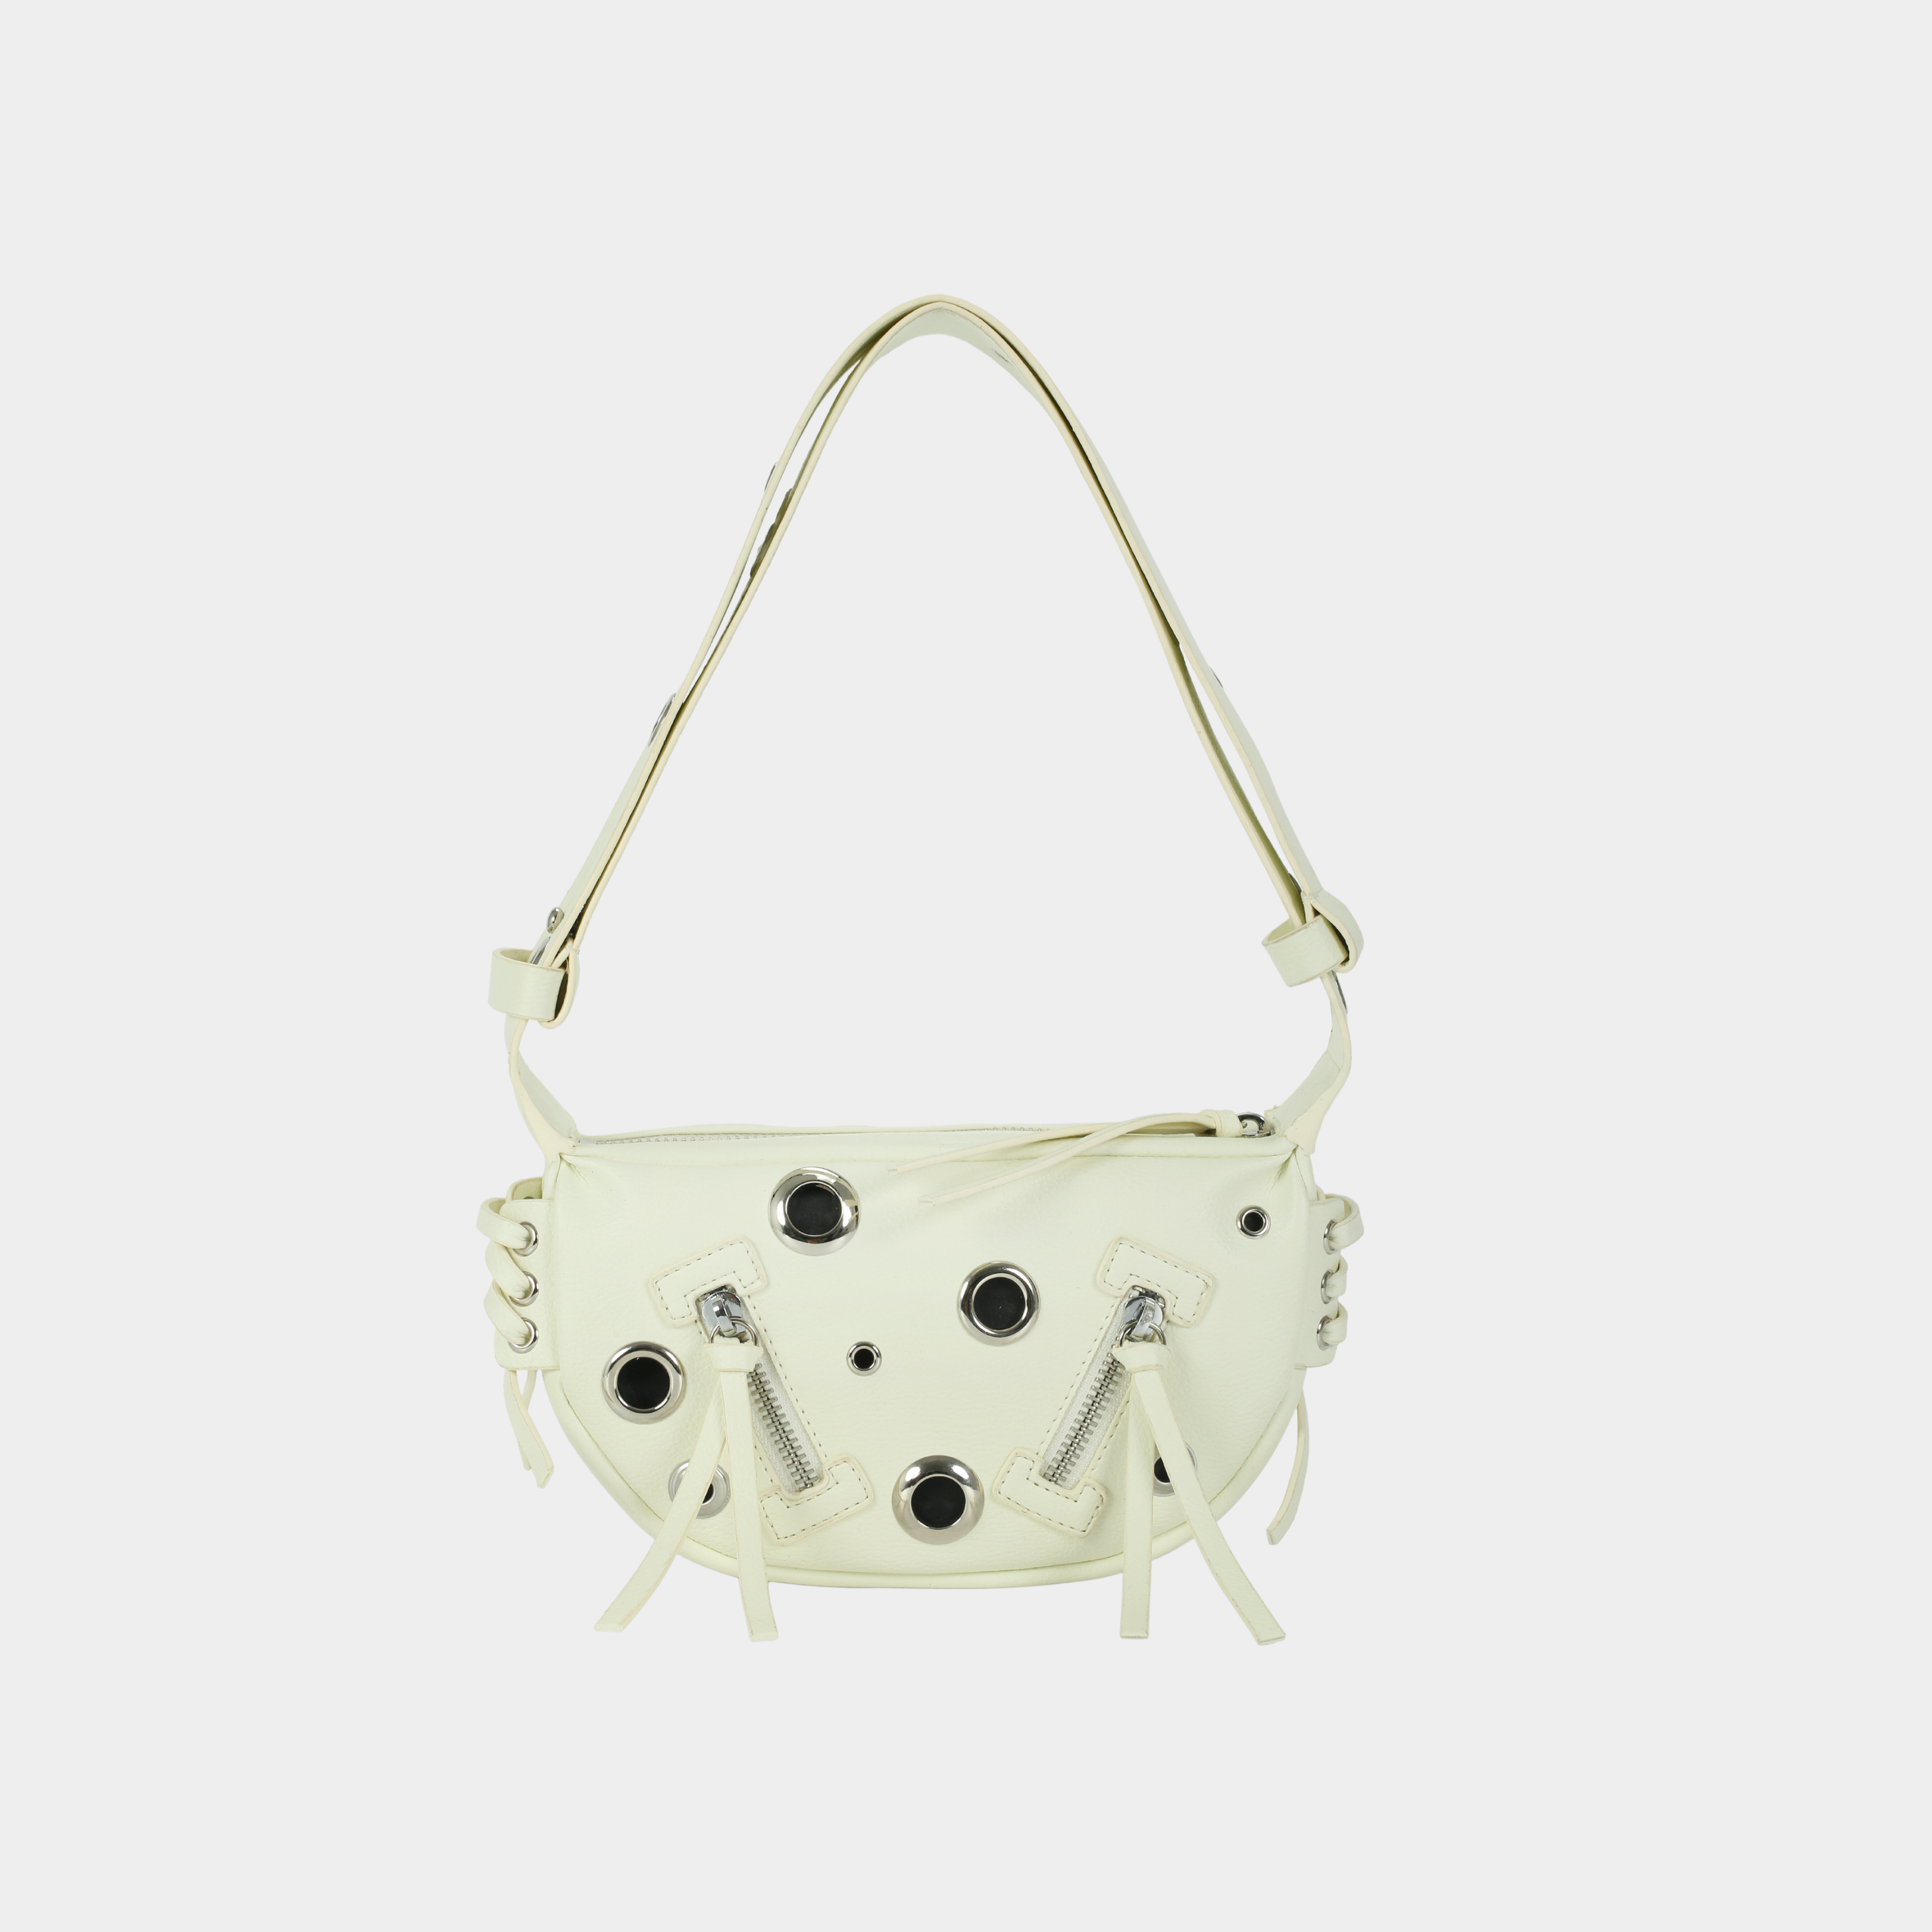 LACE bag small size (S) white color